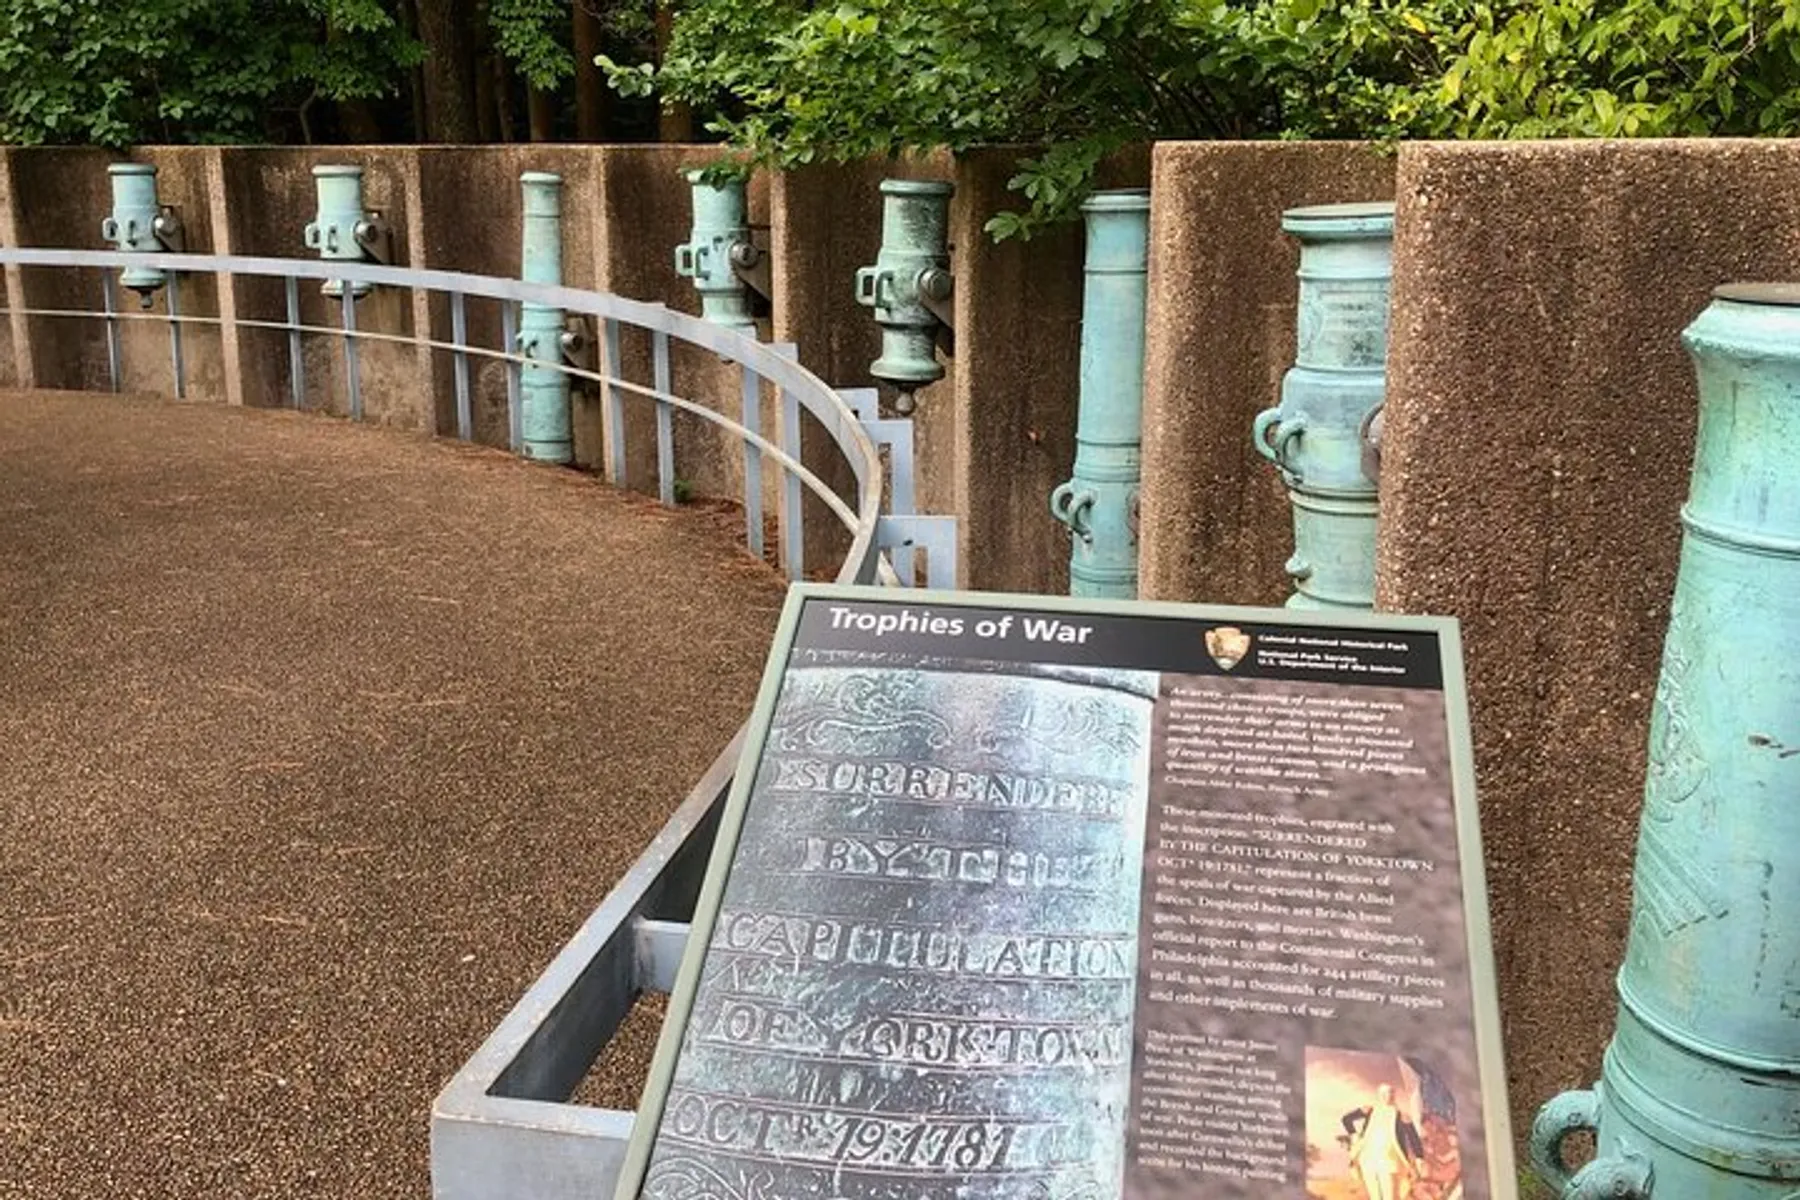 The image shows a curved walkway with a row of green cannons mounted on pedestals behind a metal barrier, with an information plaque in the foreground titled Trophies of War.